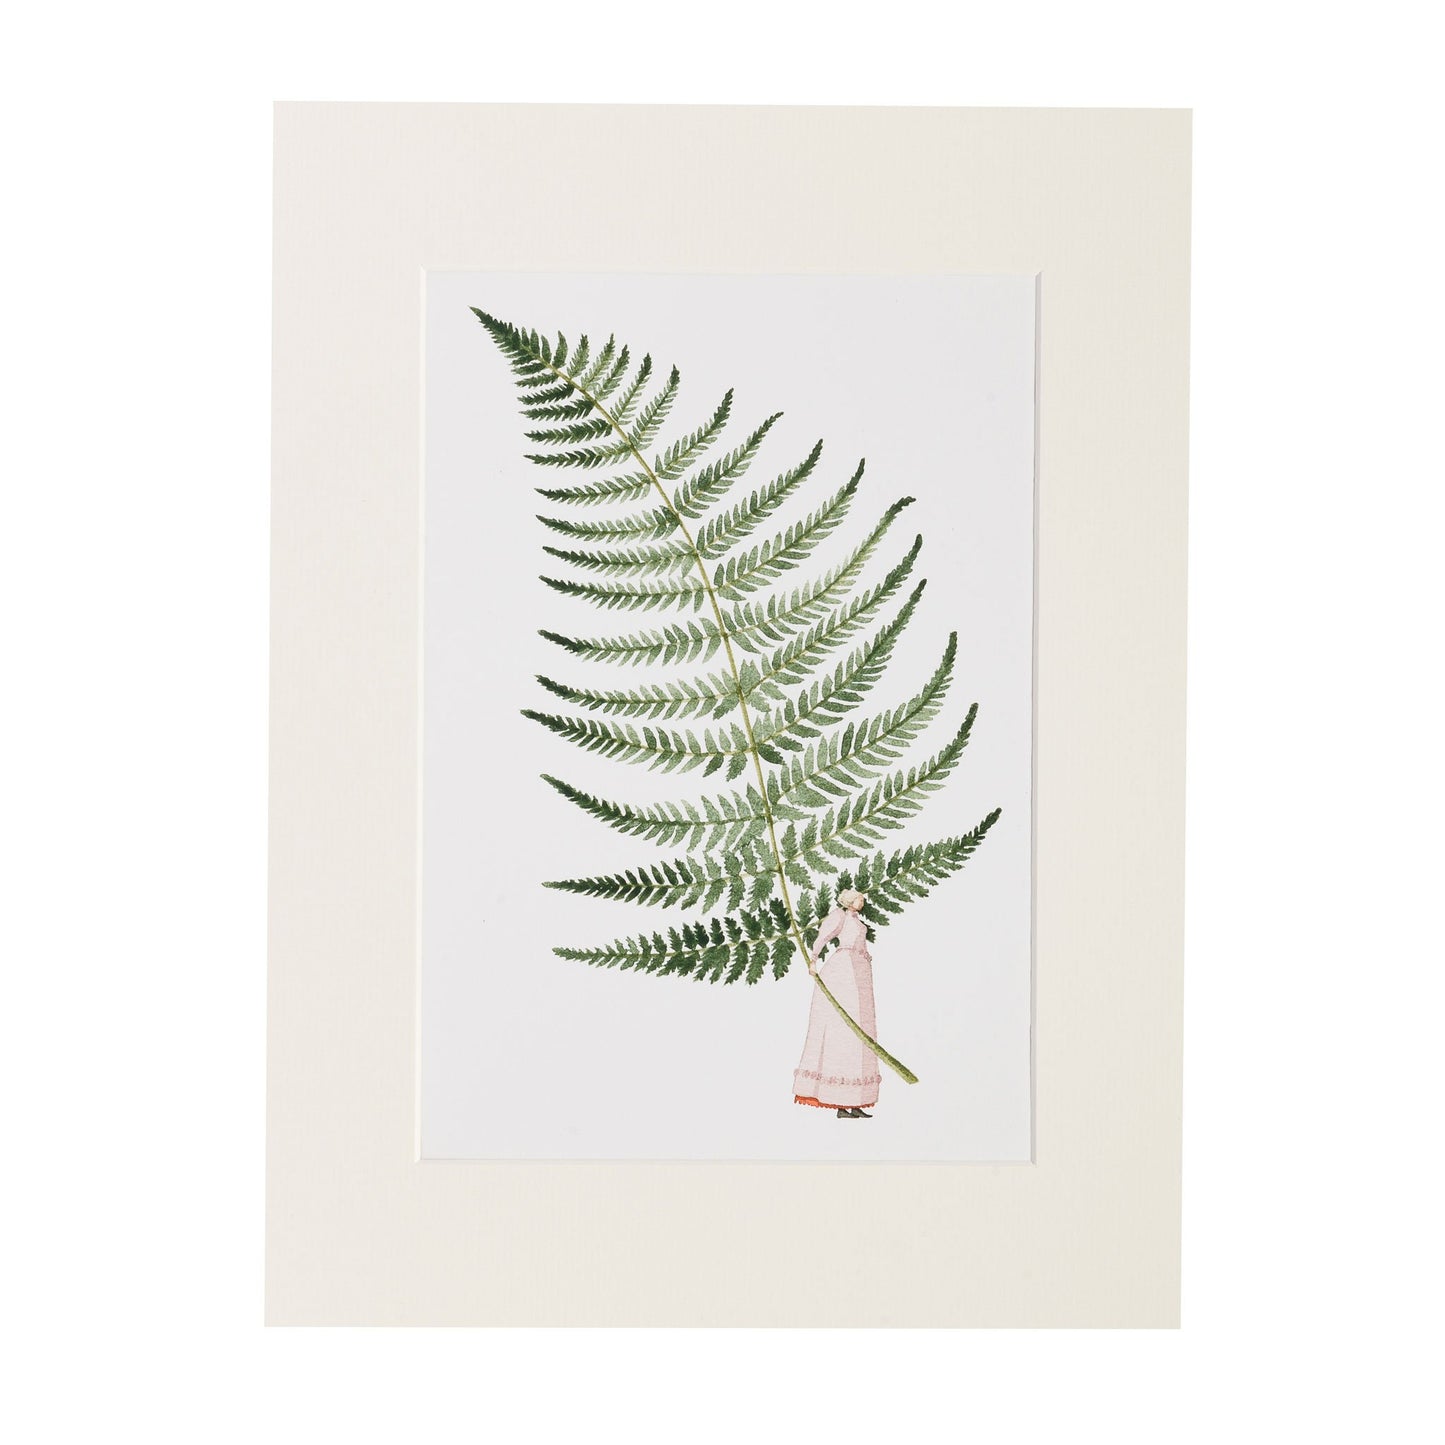 giclee print, mounted print, print, illustration, made in england, ferns, archival paper, art print